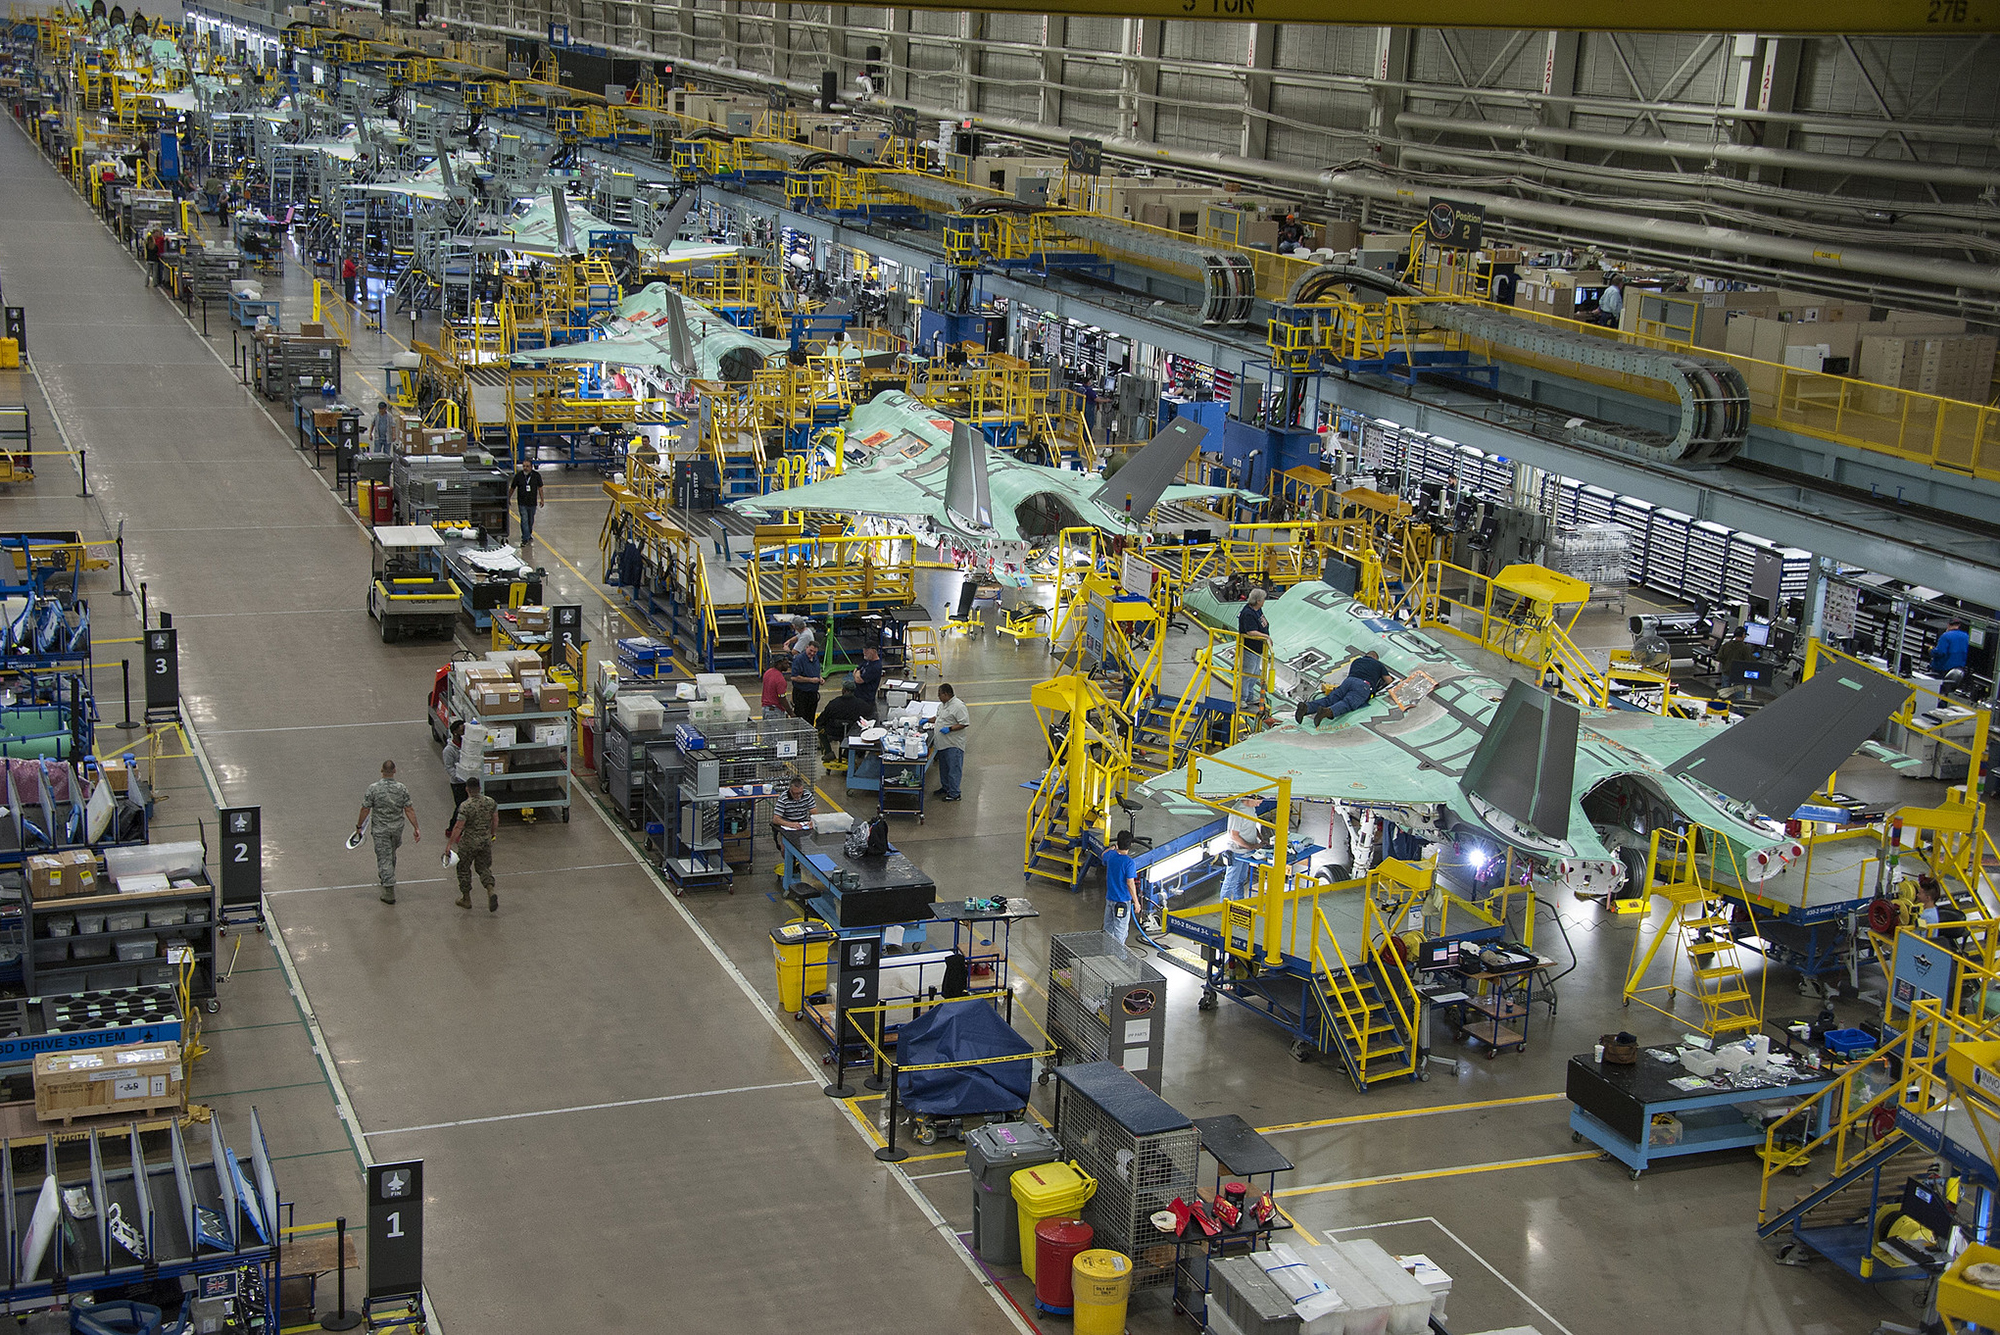 Lockheed Martin Fort Worth Texas Photo by Alexander H Groves   Production Line from Monorail    FP170764    1707383   JSF   F-35   AF Plant 4   04_06_17   Leeya Davis   Image has NOT been released   FOUO   FOR OFFICIAL USE ONLY